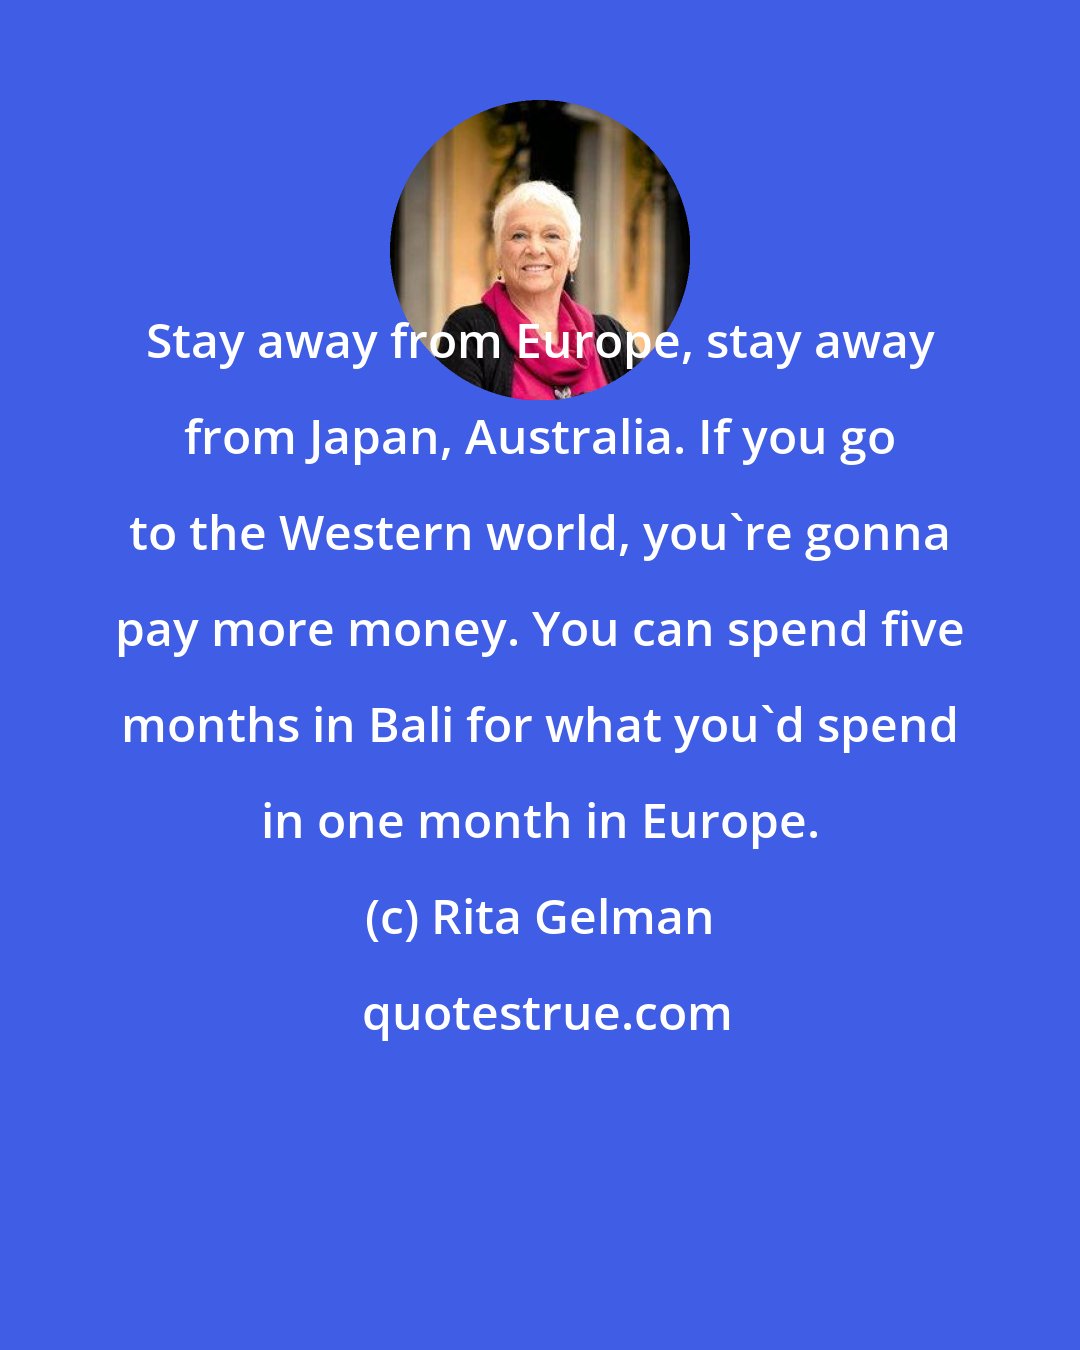 Rita Gelman: Stay away from Europe, stay away from Japan, Australia. If you go to the Western world, you're gonna pay more money. You can spend five months in Bali for what you'd spend in one month in Europe.